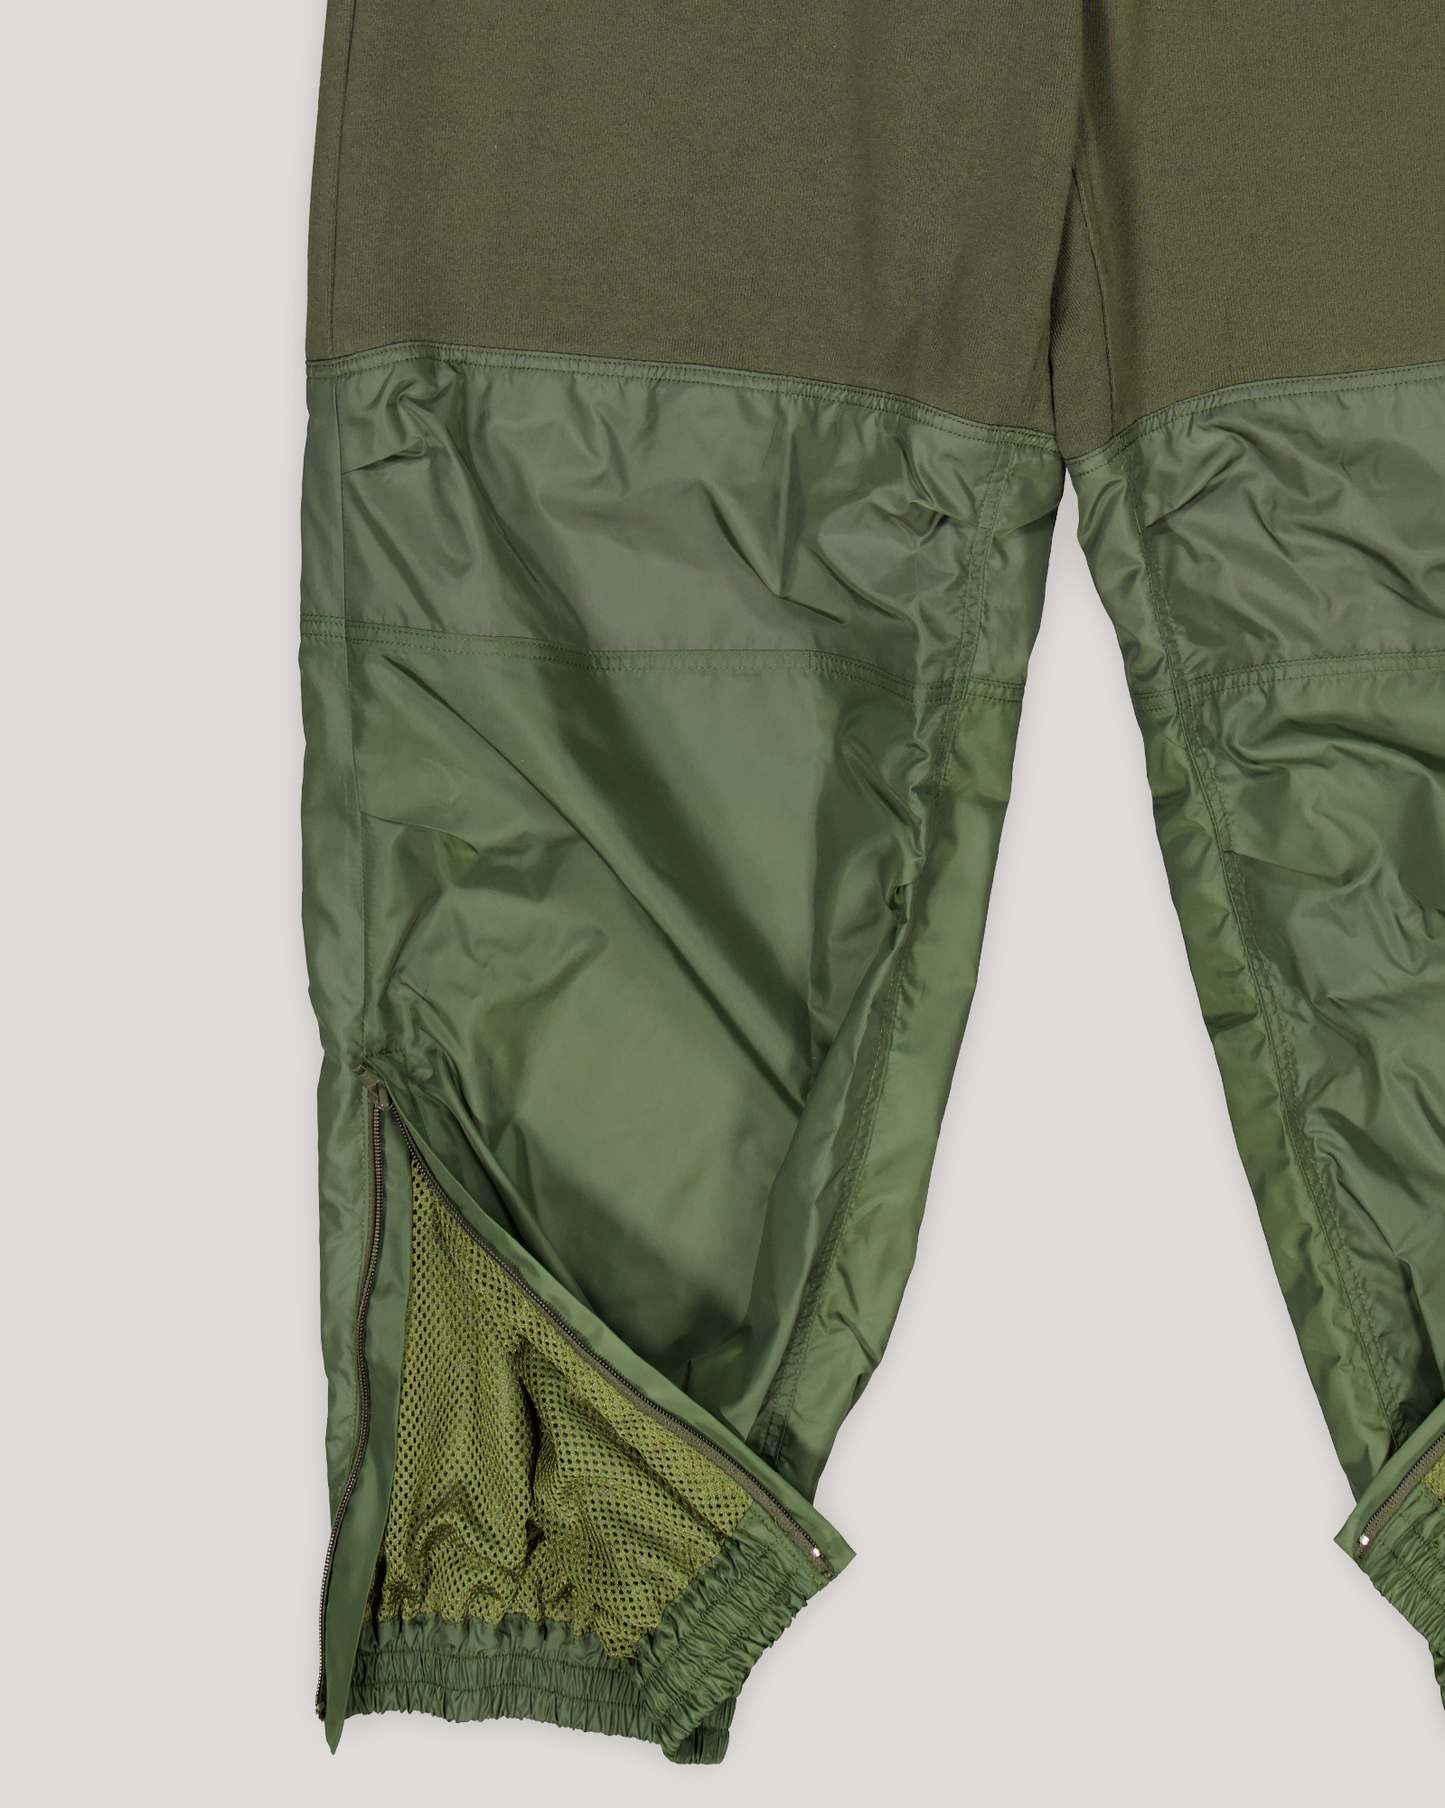 UNDERCOVER PANELLED TRACK PANT